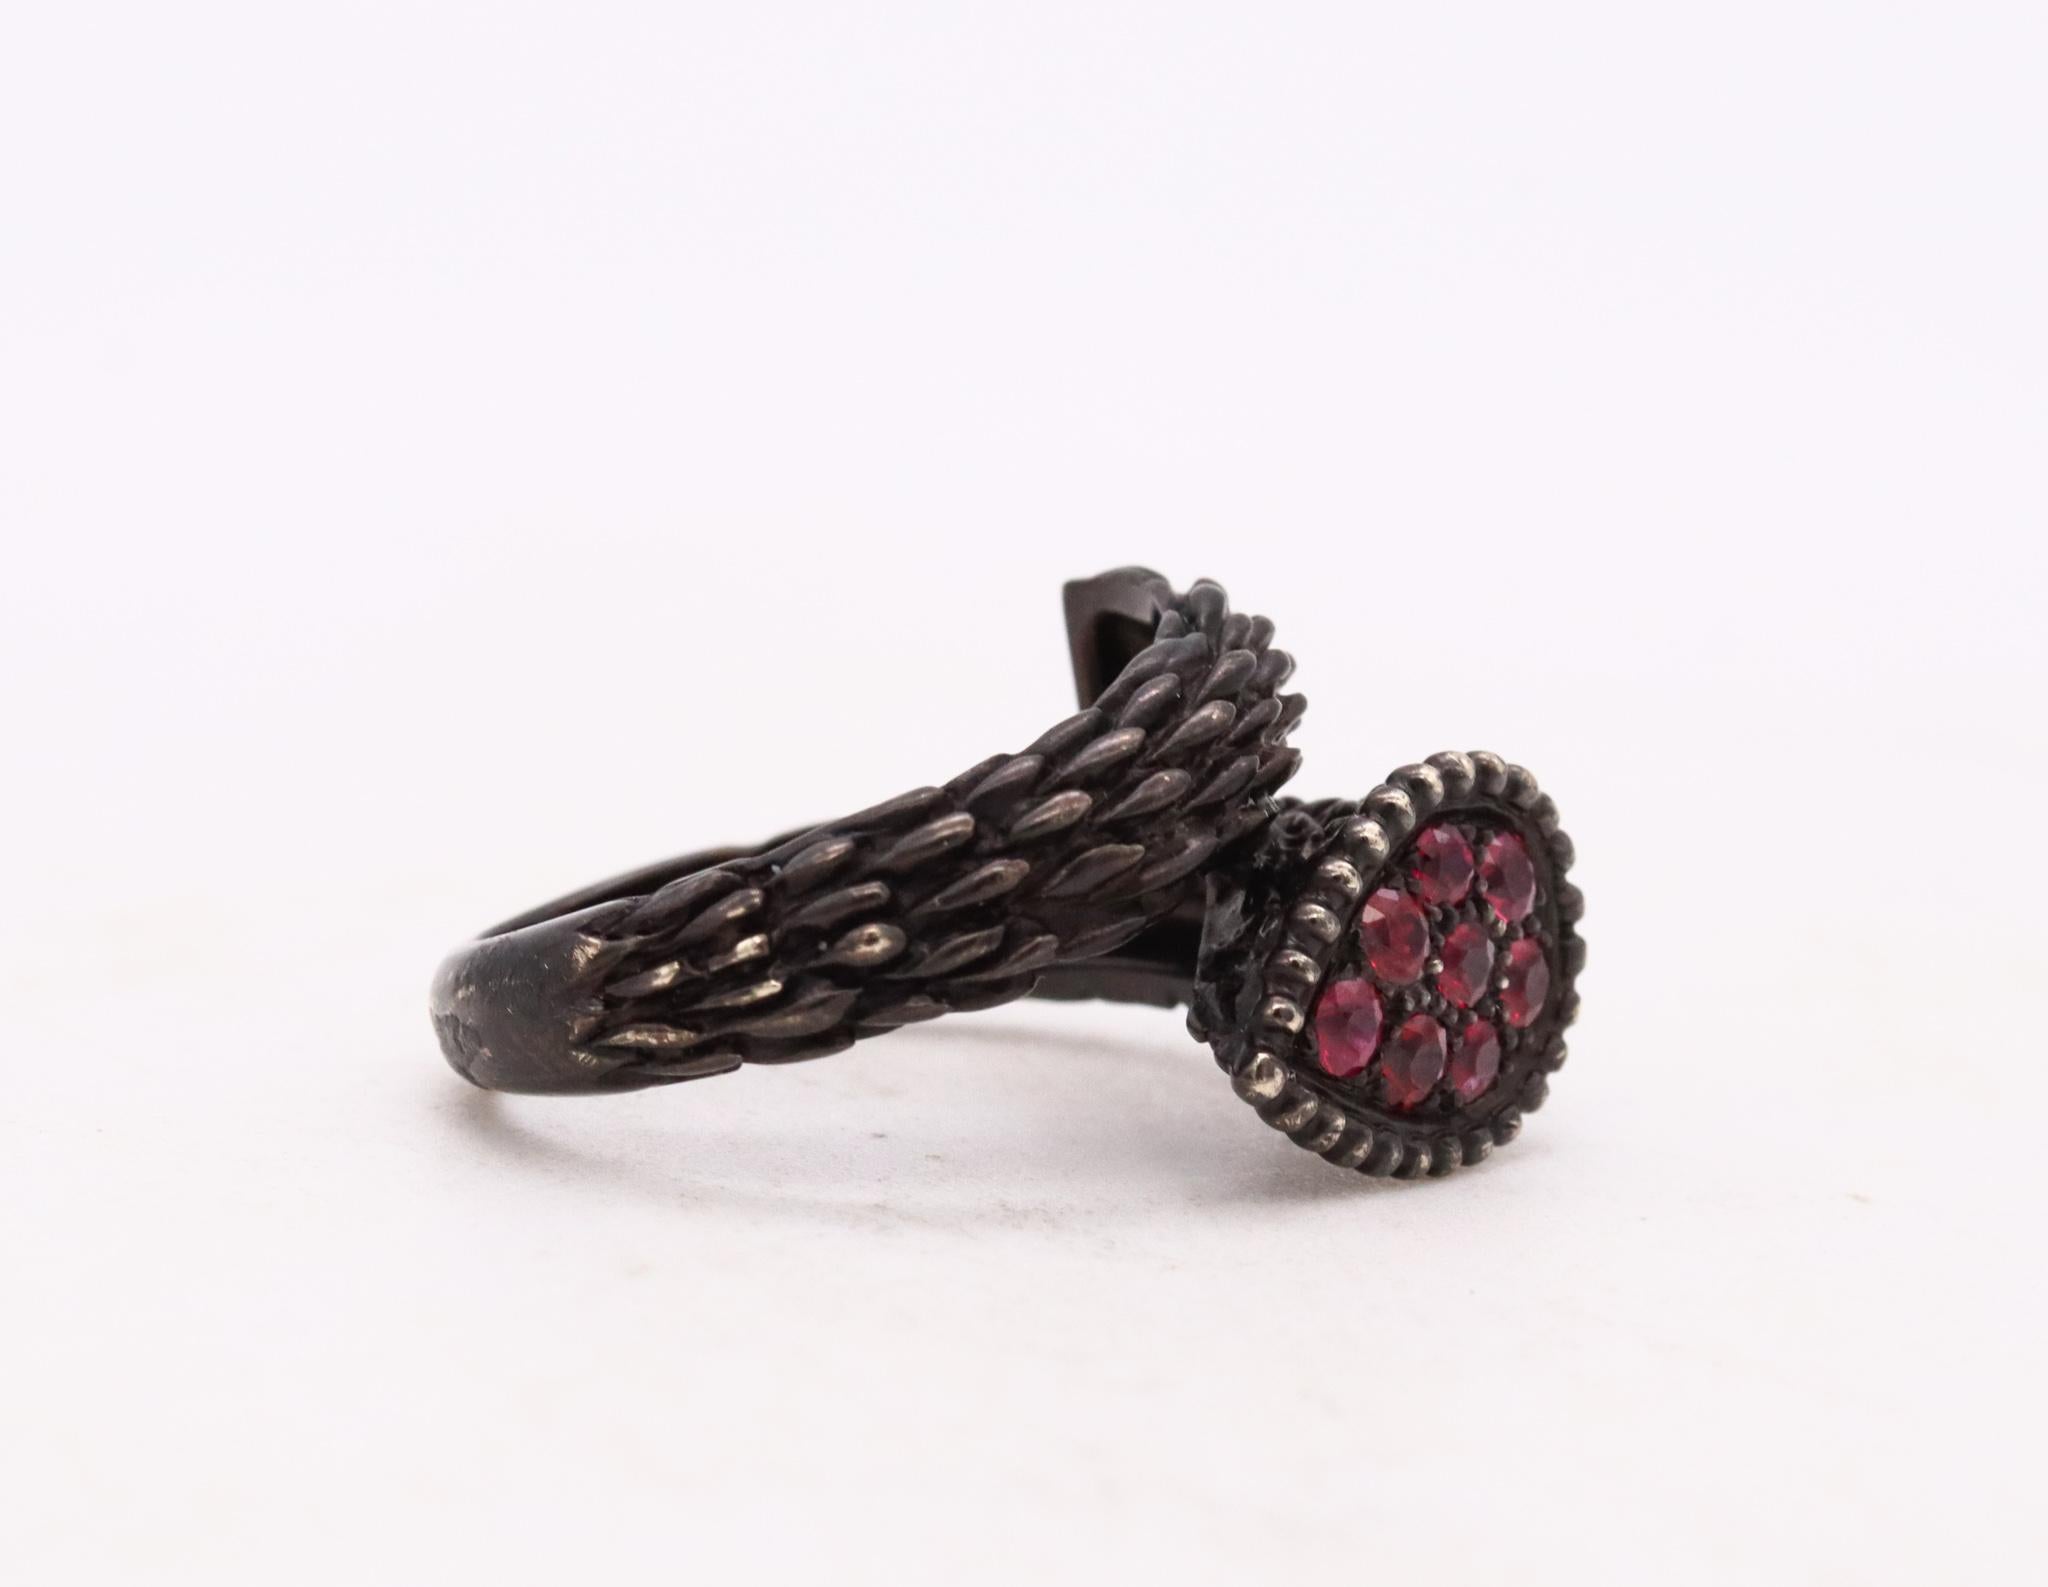 Boucheron Paris Serpent Boheme Ring in 18Kt Blackened Gold with Burmese Rubies In Excellent Condition For Sale In Miami, FL